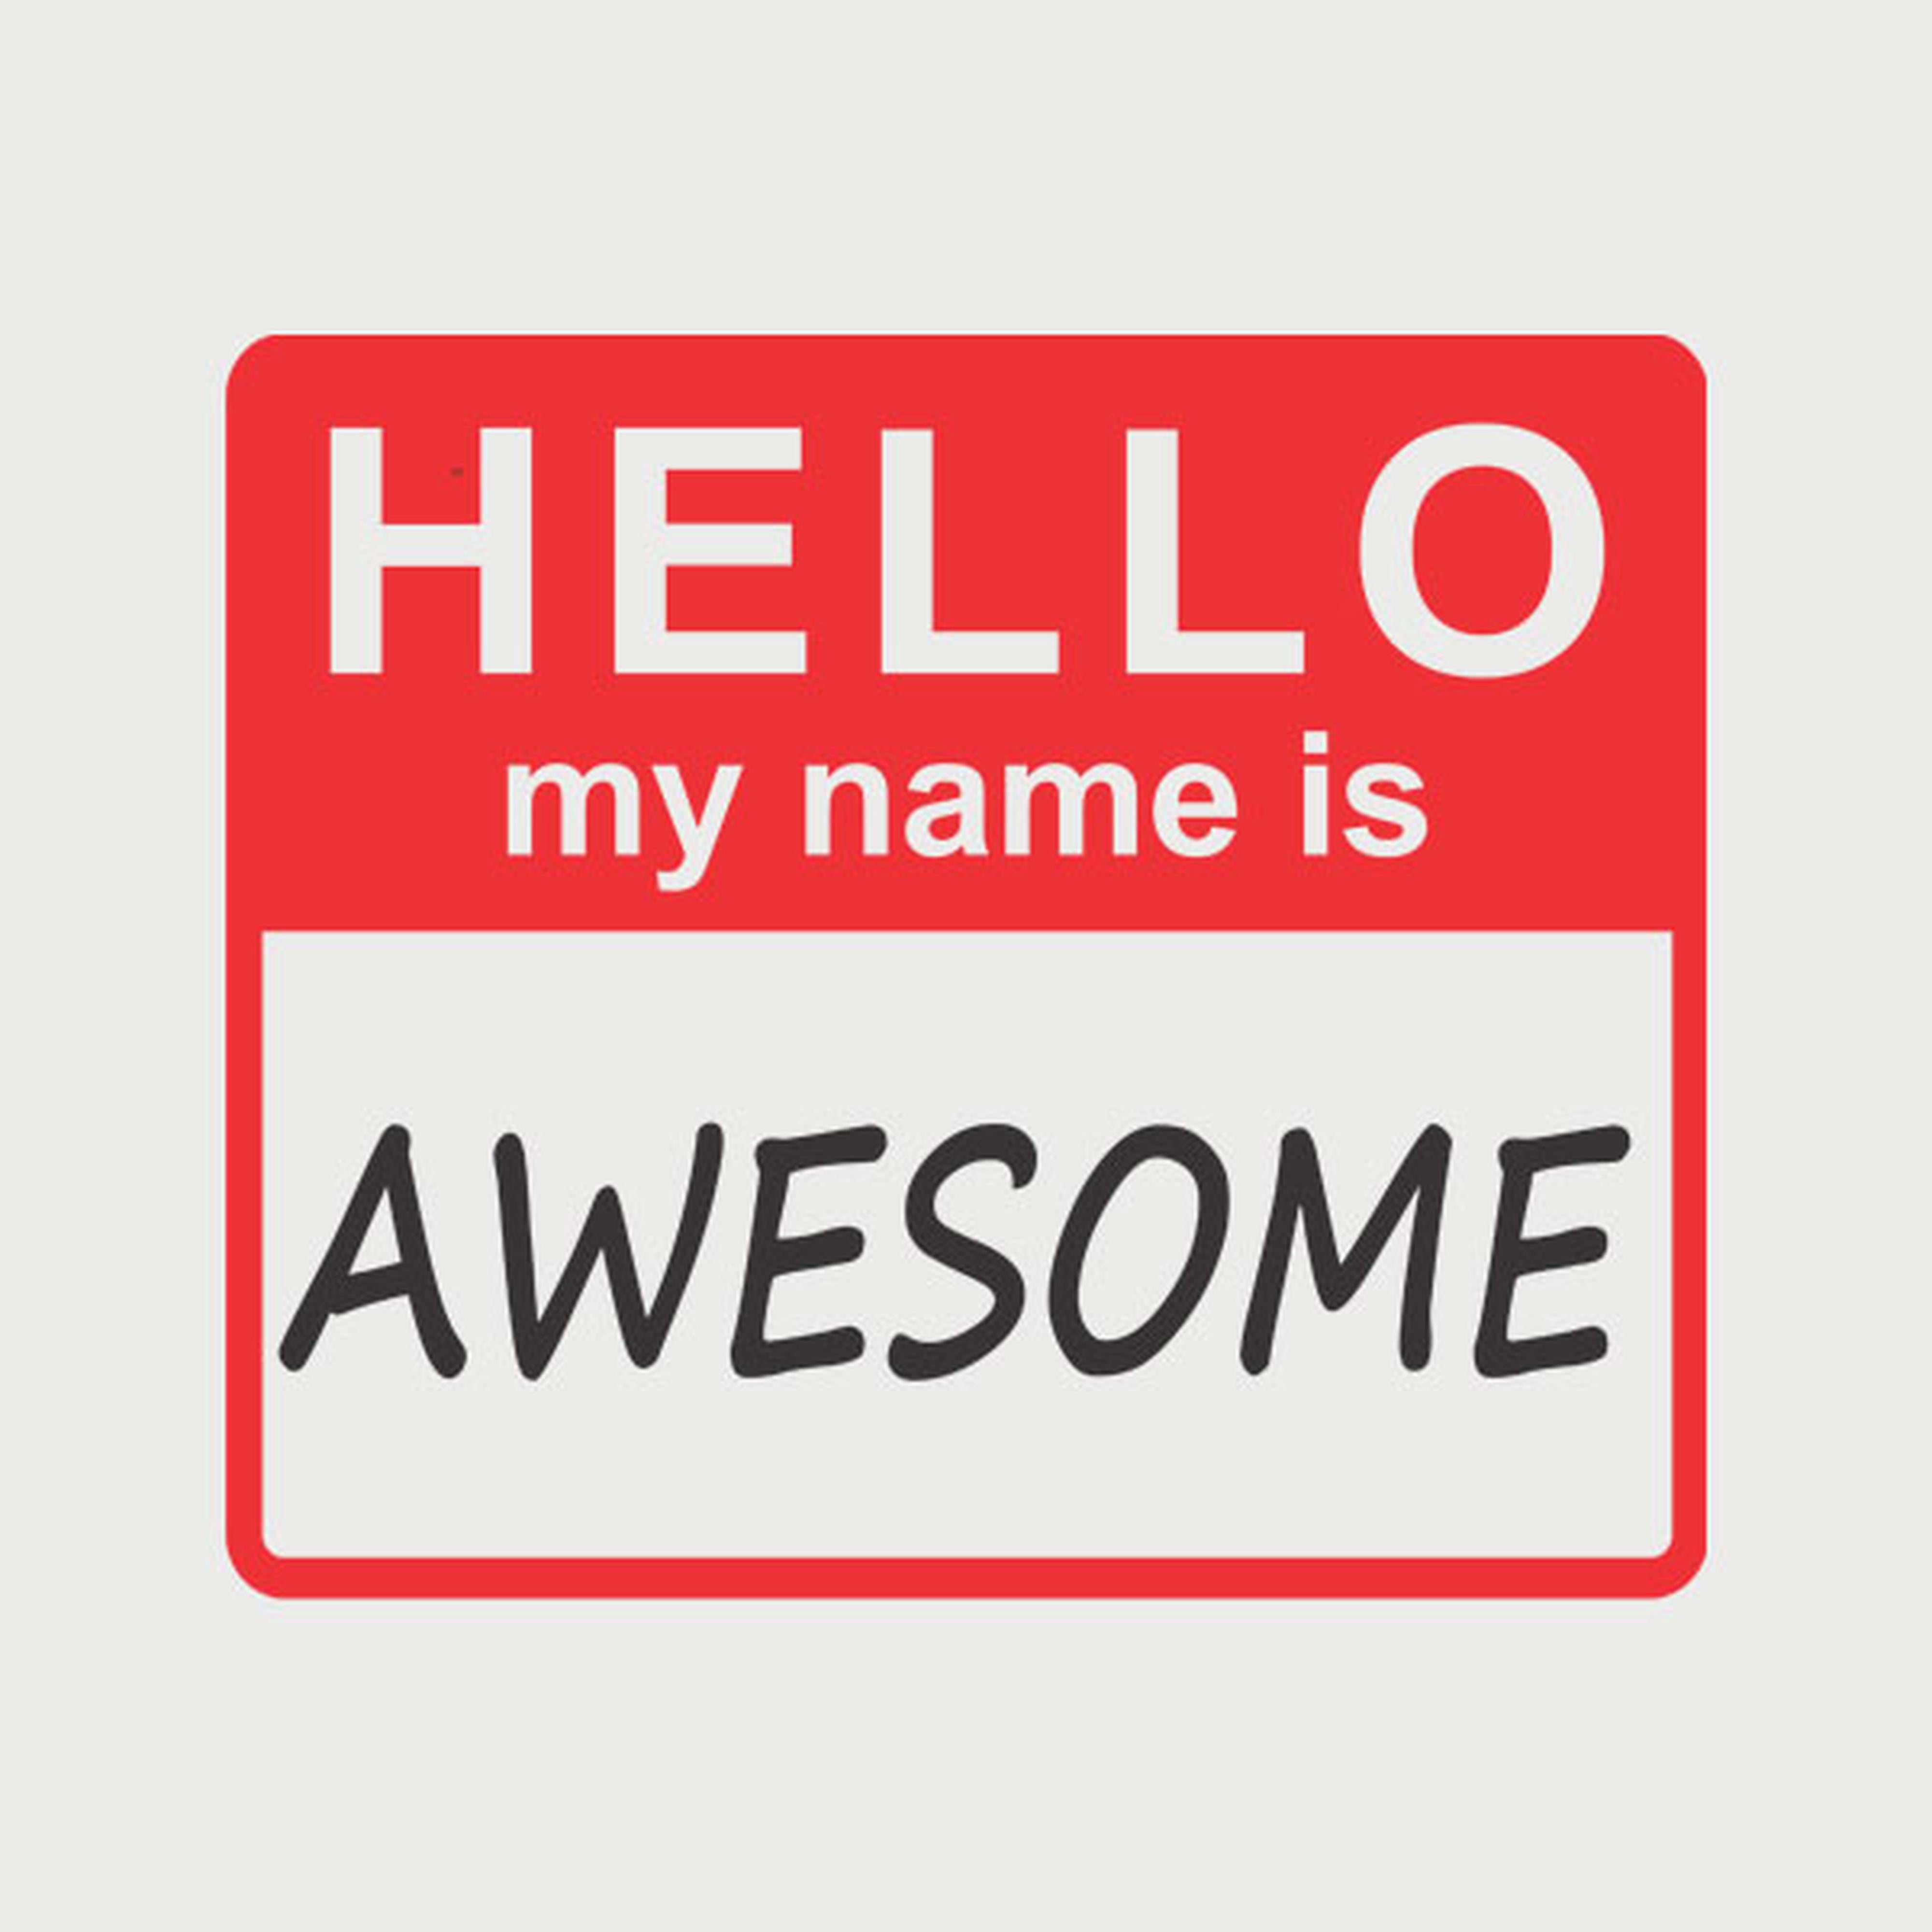 HELLO - My name is awesome